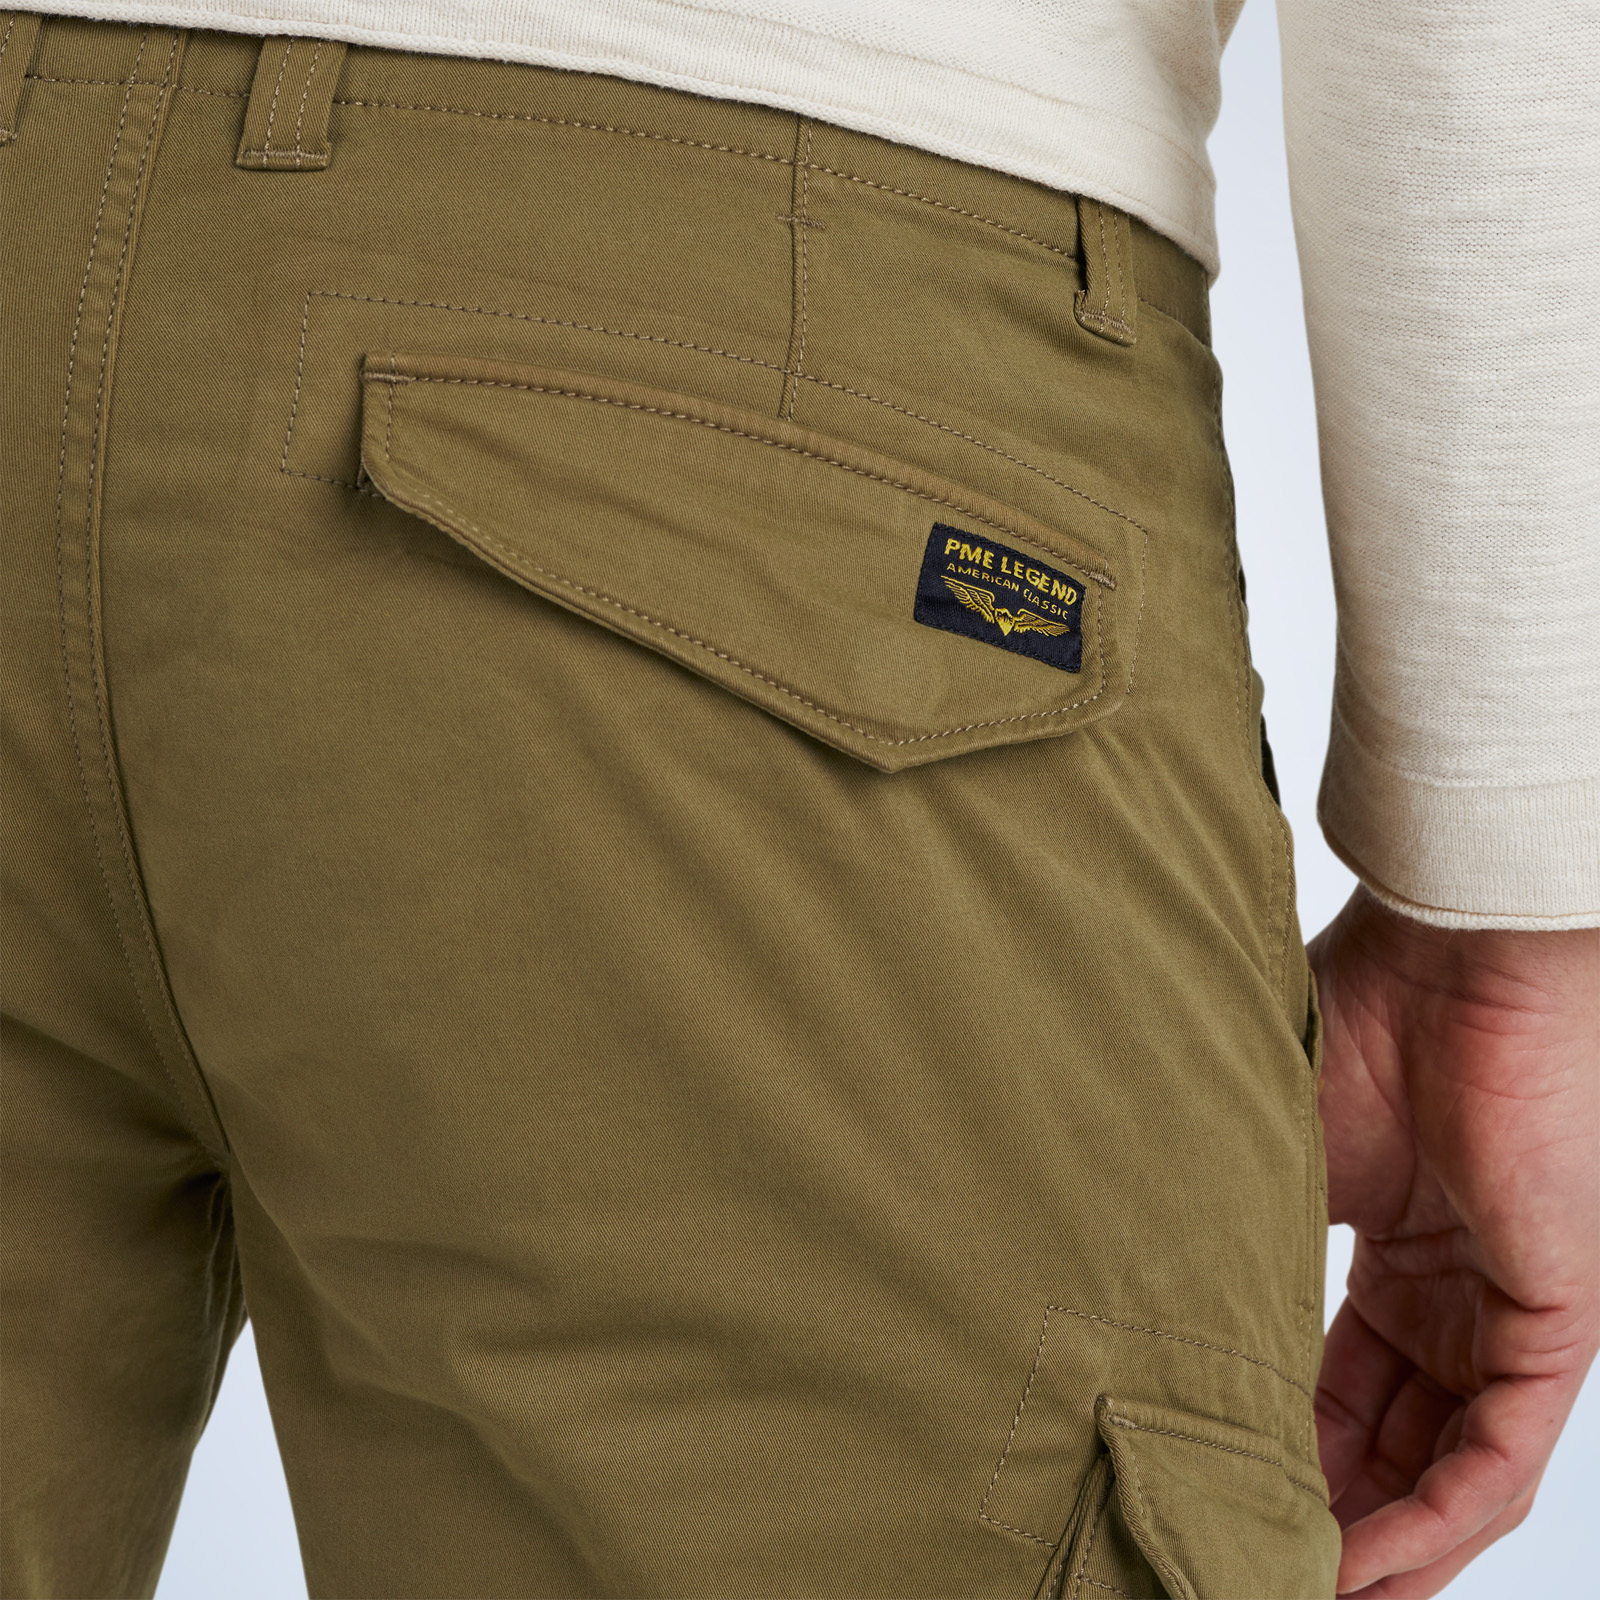 Free | | pants LEGEND fit cargo returns and Nordrop PME shipping tapered